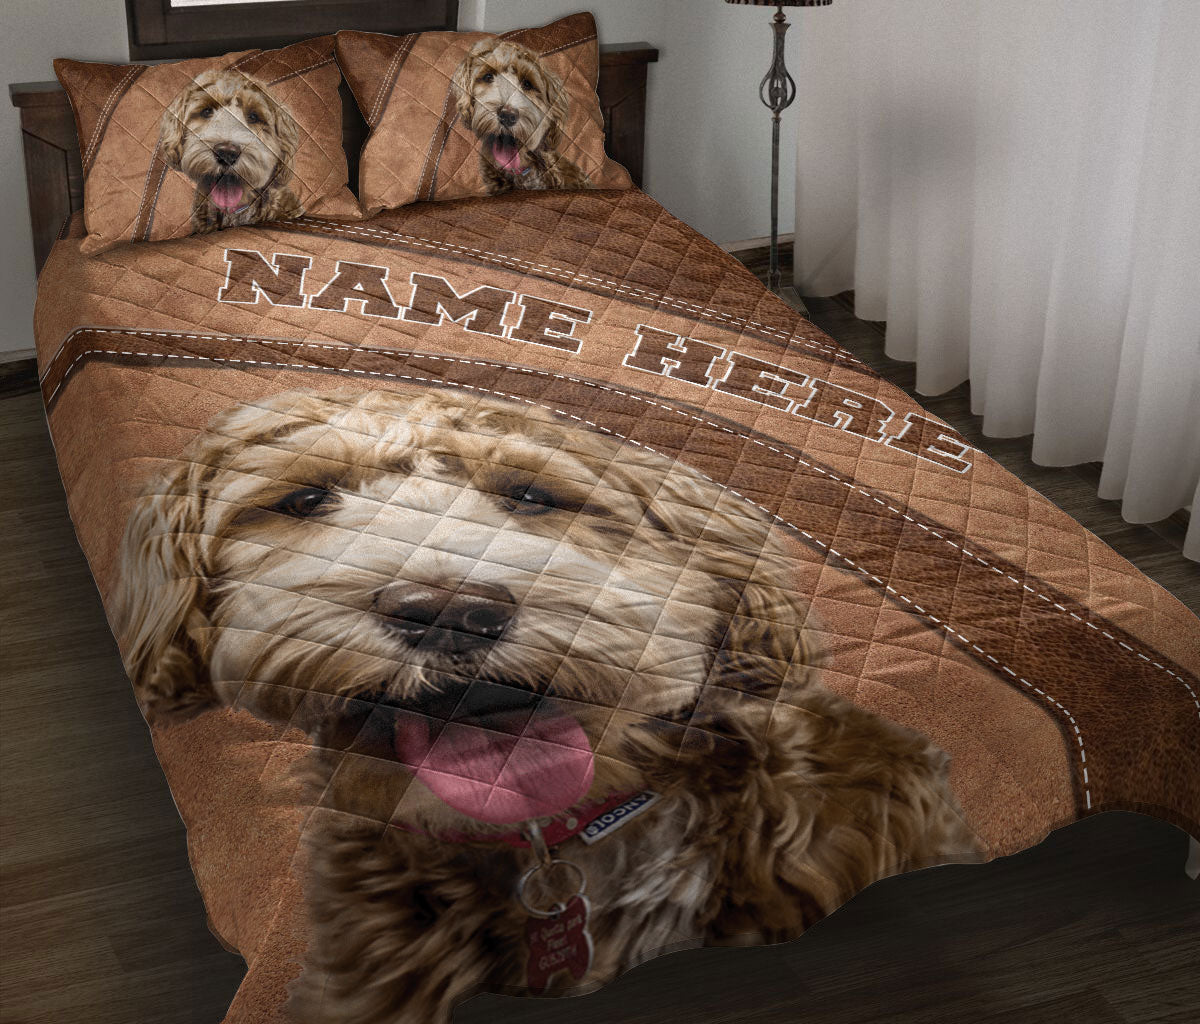 Ohaprints-Quilt-Bed-Set-Pillowcase-Goldendoodle-Brown-Pattern-Gift-For-Dog-Lover-Custom-Personalized-Name-Blanket-Bedspread-Bedding-866-Throw (55'' x 60'')